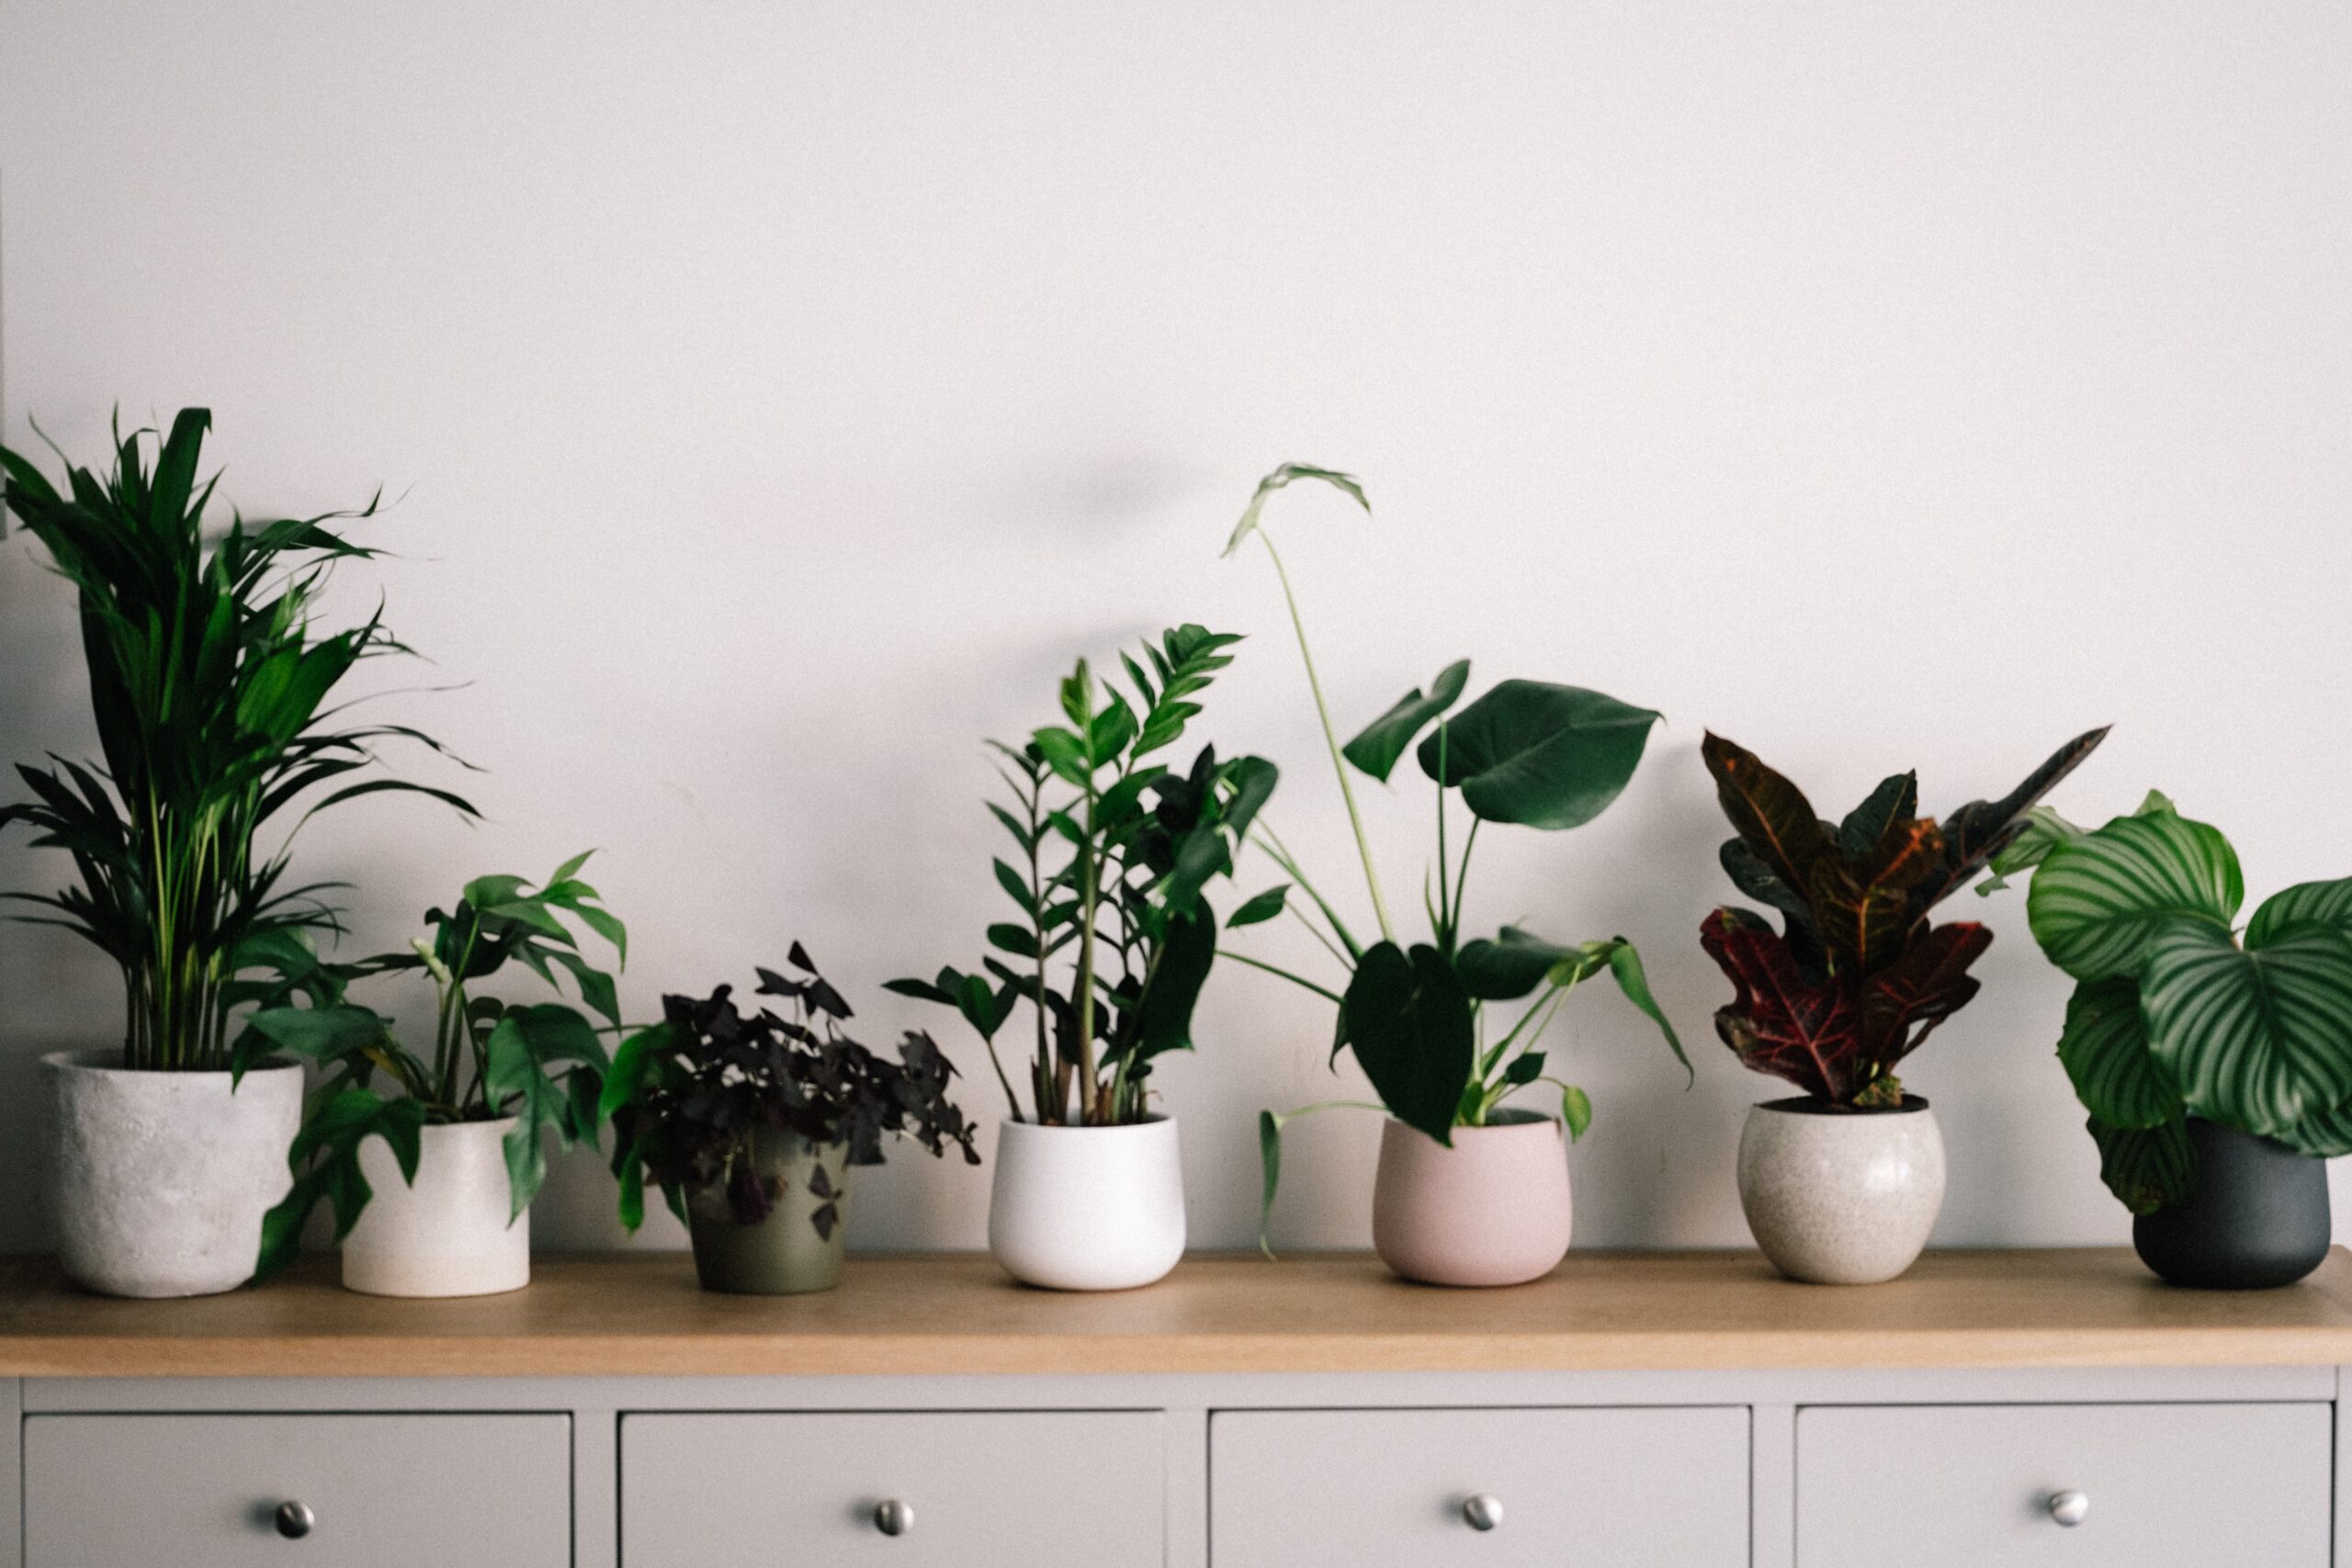 A lineup of assorted houseplants on a countertop